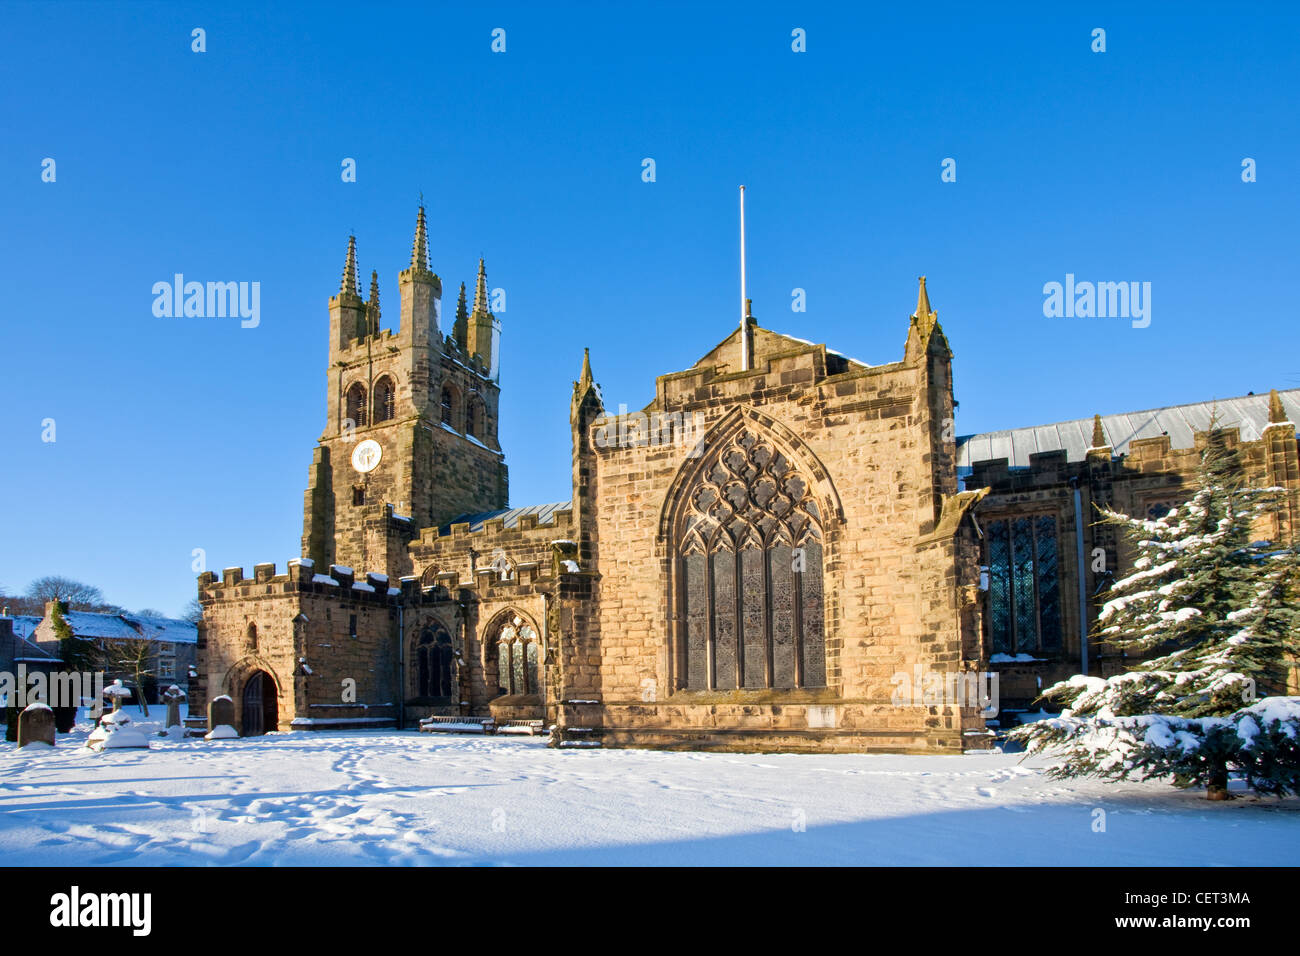 Snow covering the churchyard of Tideswell Church, known as the 'Cathedral of the Peak' in the Peak District National Park. Stock Photo